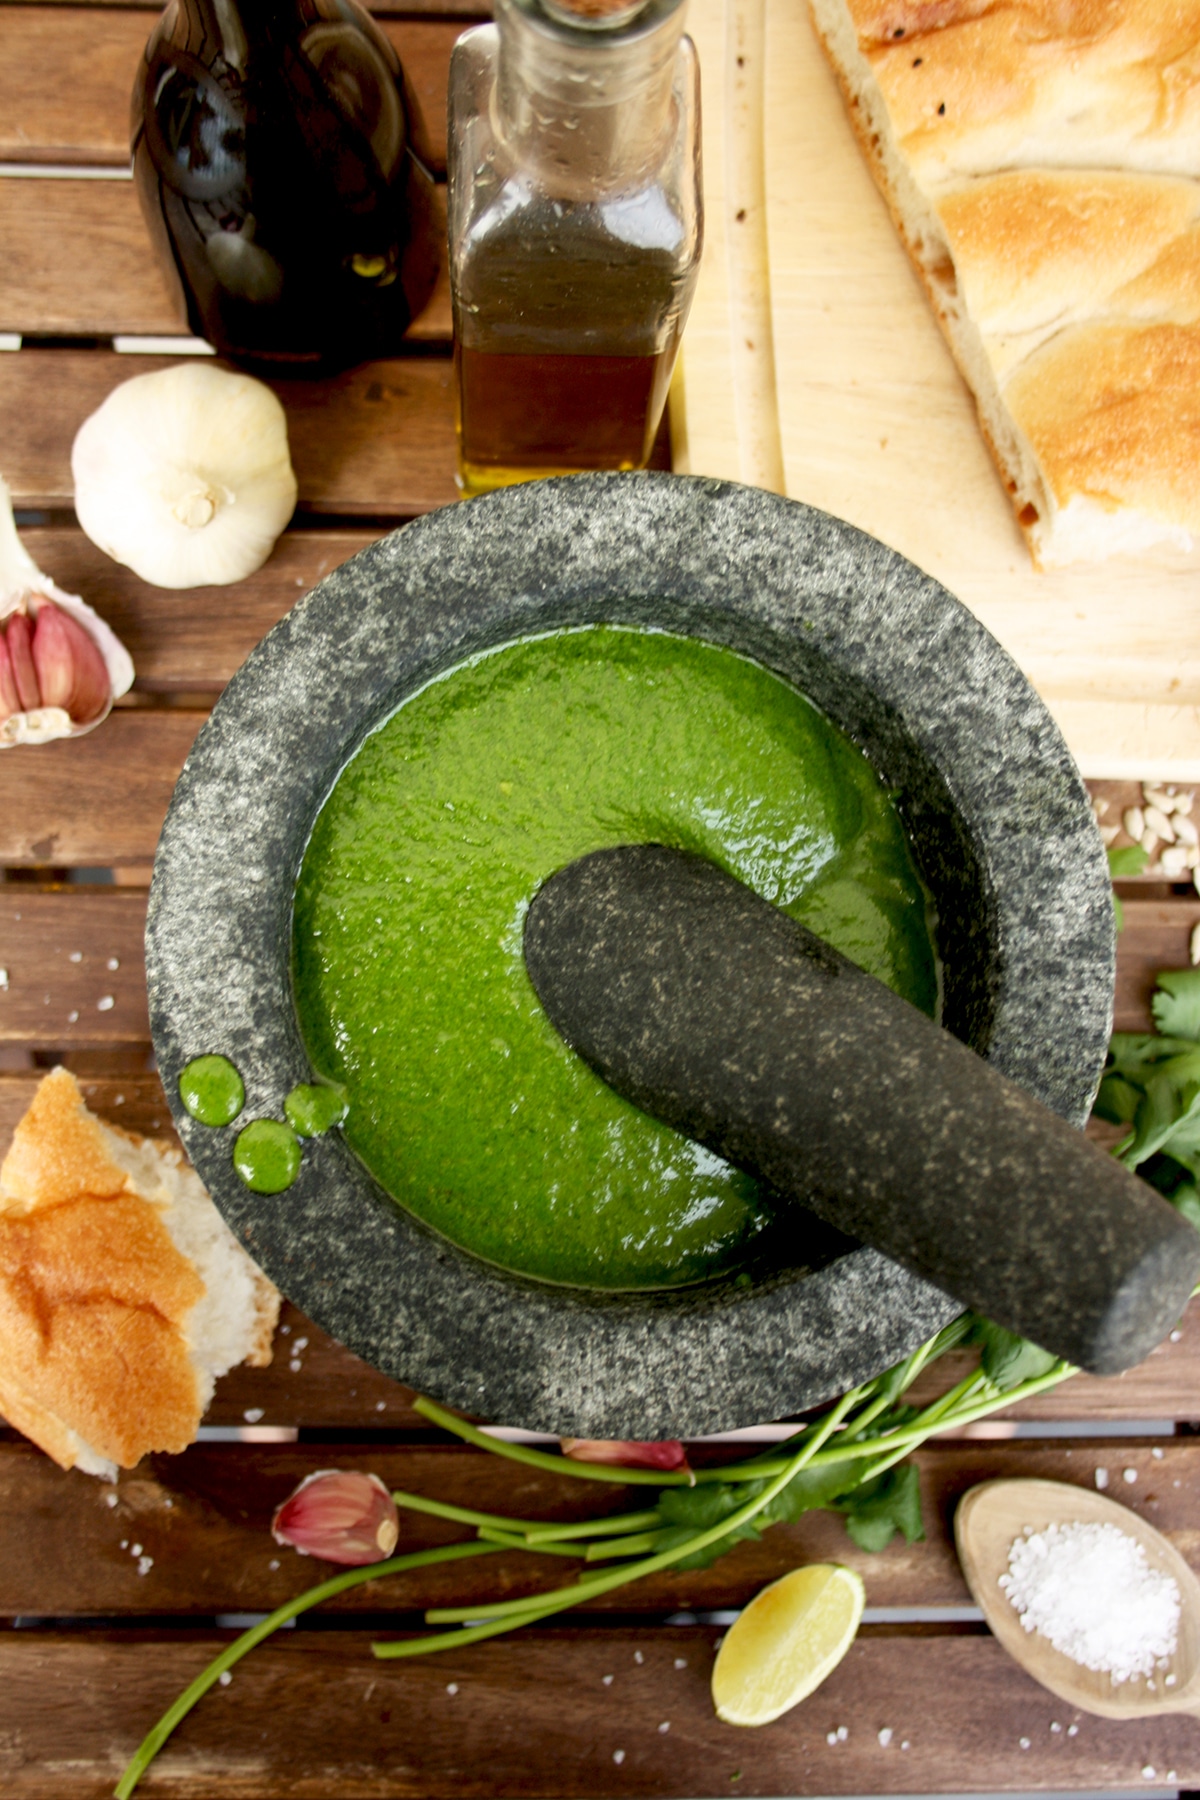 Mojo Verde: Canarian Green Sauce made of cilantro, garlic, olive oil and cumin is perfect for roasted vegetables and bread and just takes 5 minutes to make.